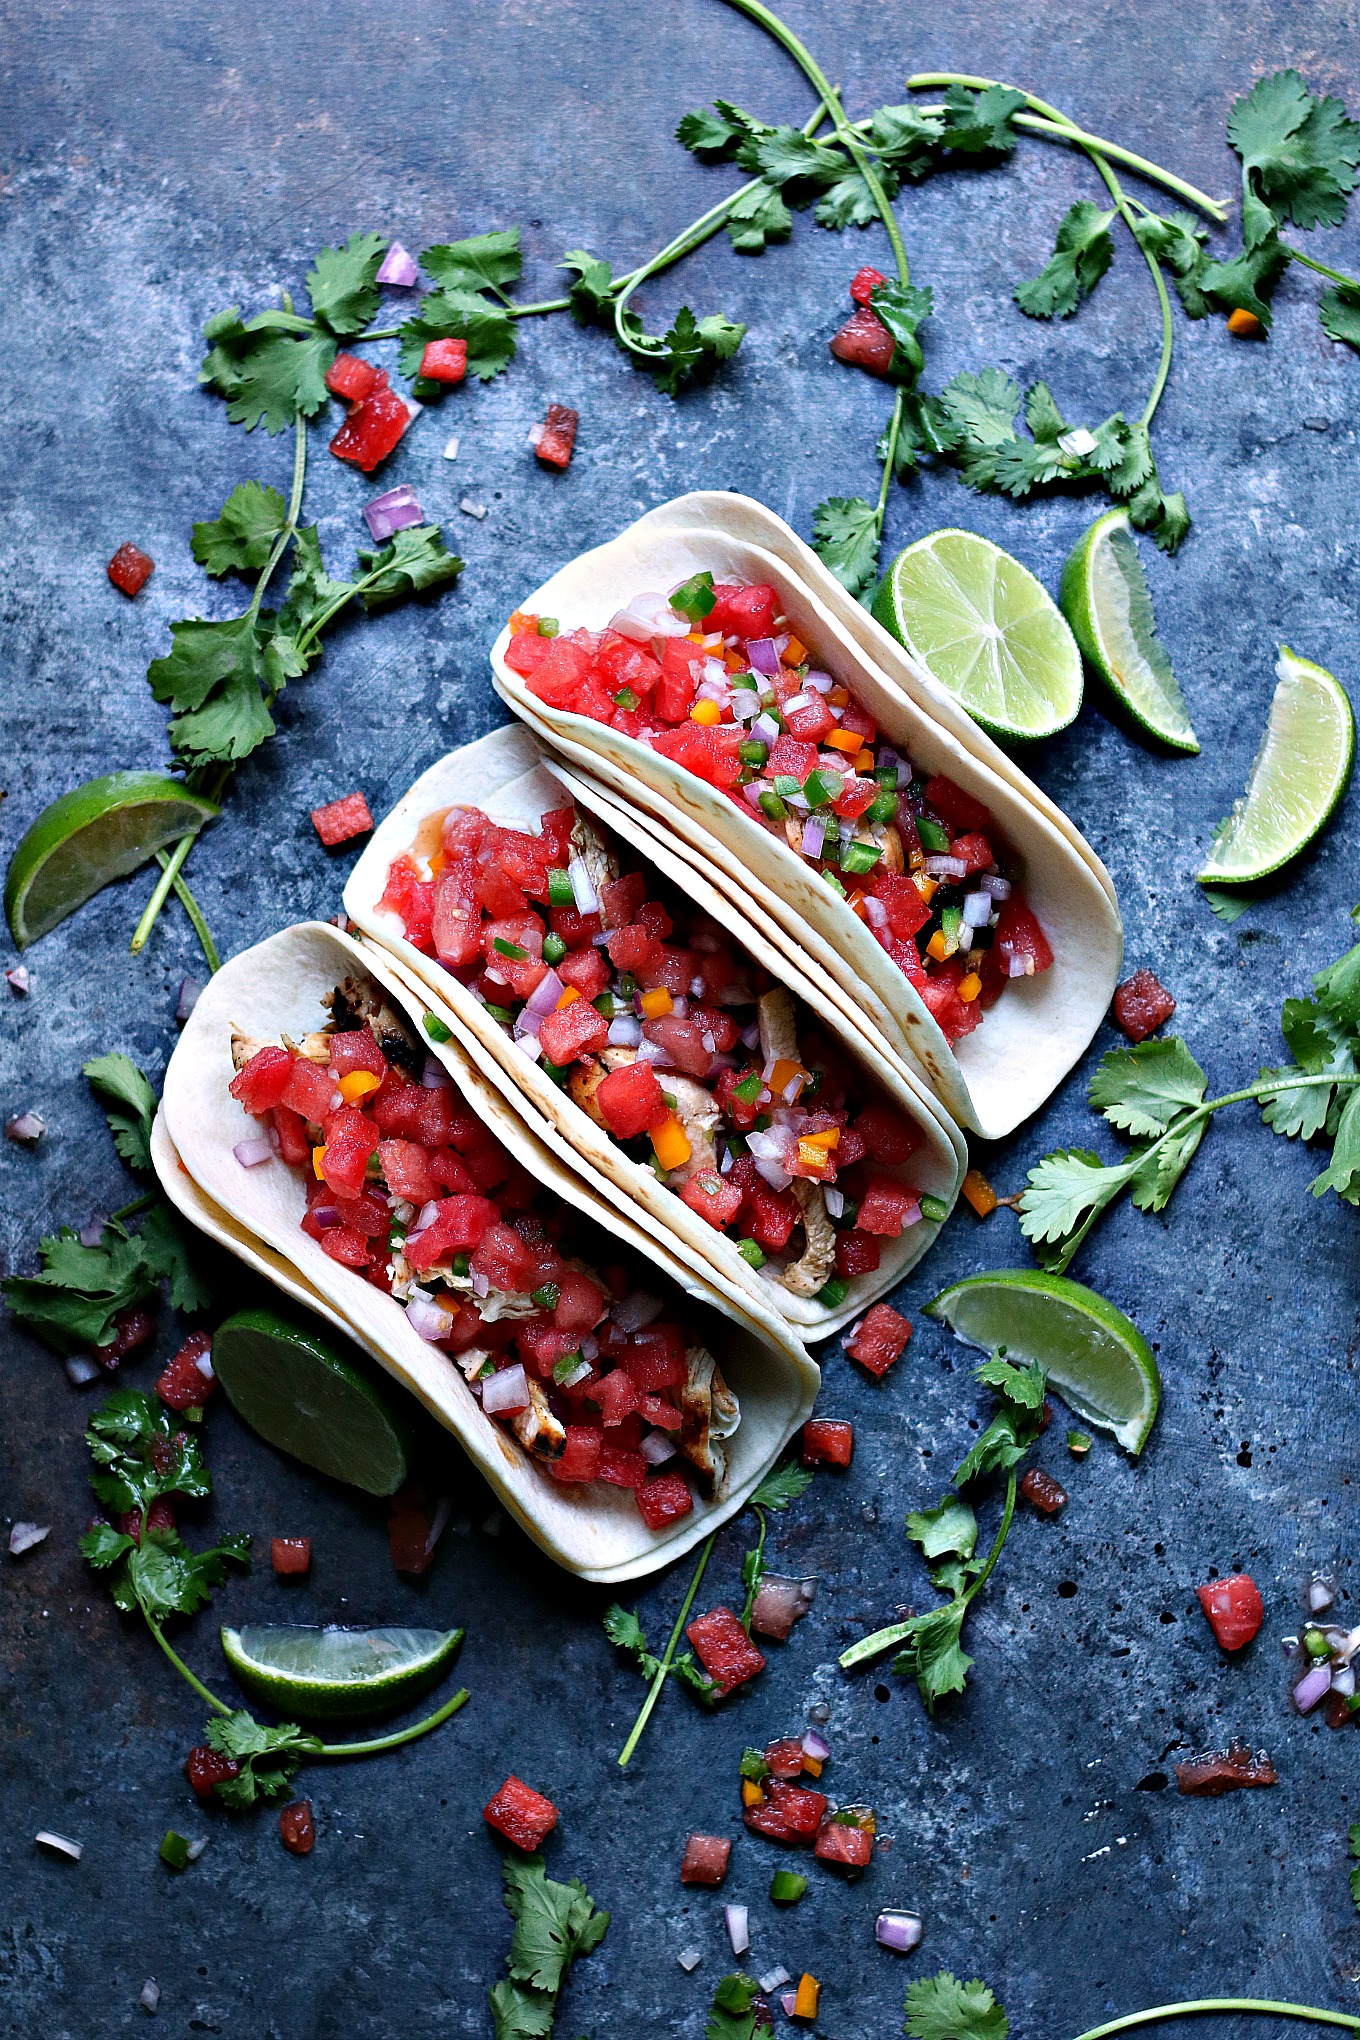 Overhead image of 3 grilled honey lime chicken tacos with watermelon salsa, ingredients are scattered around a dark surface randomly.